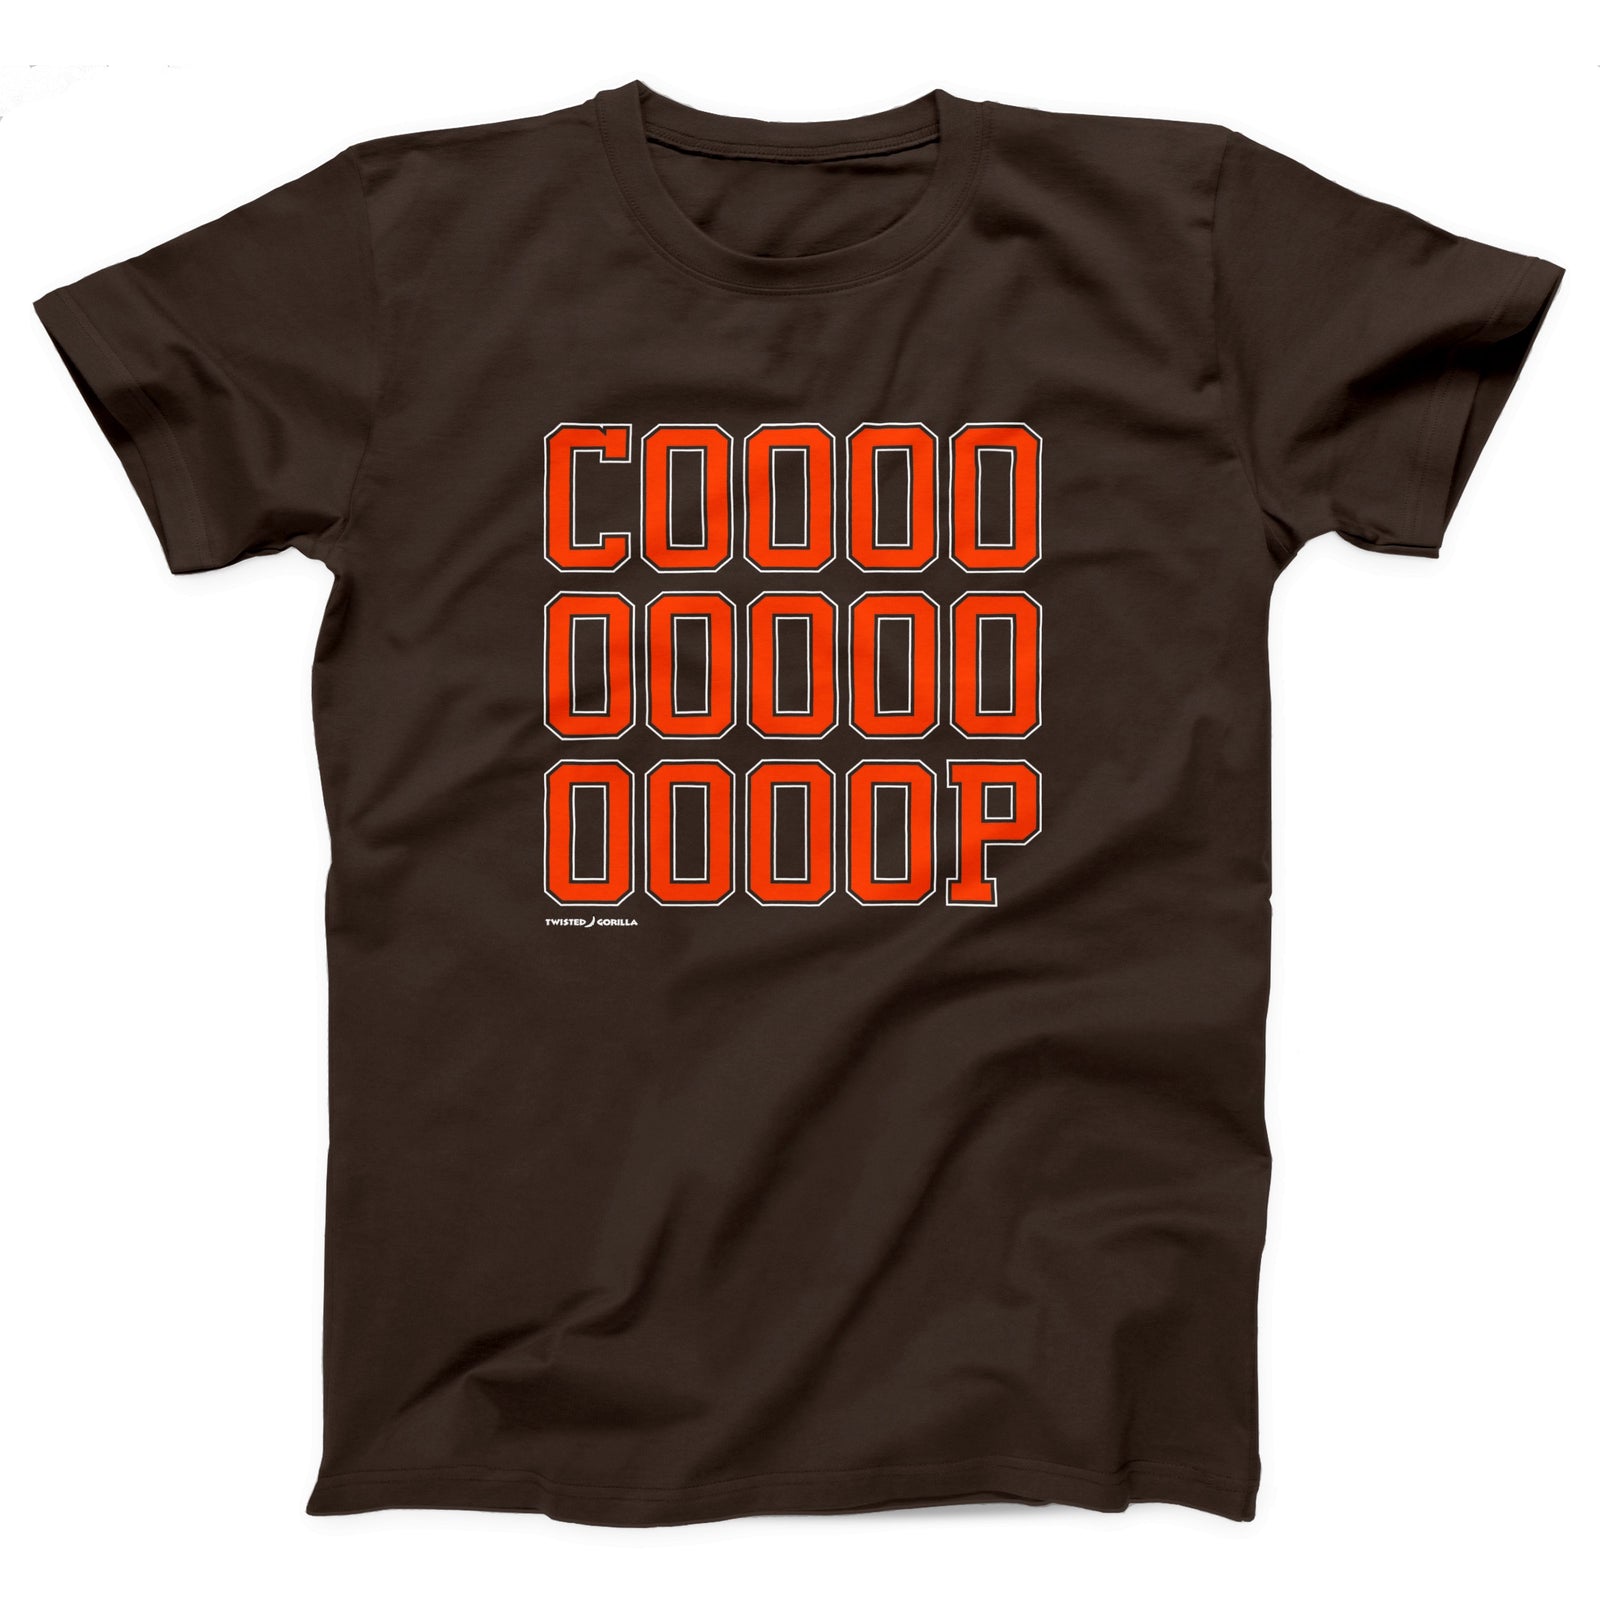 //cdn.shopify.com/s/files/1/0274/2488/2766/products/coooop-menunisex-t-shirt-870172_5000x.jpg?v=1659341645 5000w,
    //cdn.shopify.com/s/files/1/0274/2488/2766/products/coooop-menunisex-t-shirt-870172_4500x.jpg?v=1659341645 4500w,
    //cdn.shopify.com/s/files/1/0274/2488/2766/products/coooop-menunisex-t-shirt-870172_4000x.jpg?v=1659341645 4000w,
    //cdn.shopify.com/s/files/1/0274/2488/2766/products/coooop-menunisex-t-shirt-870172_3500x.jpg?v=1659341645 3500w,
    //cdn.shopify.com/s/files/1/0274/2488/2766/products/coooop-menunisex-t-shirt-870172_3000x.jpg?v=1659341645 3000w,
    //cdn.shopify.com/s/files/1/0274/2488/2766/products/coooop-menunisex-t-shirt-870172_2500x.jpg?v=1659341645 2500w,
    //cdn.shopify.com/s/files/1/0274/2488/2766/products/coooop-menunisex-t-shirt-870172_2000x.jpg?v=1659341645 2000w,
    //cdn.shopify.com/s/files/1/0274/2488/2766/products/coooop-menunisex-t-shirt-870172_1800x.jpg?v=1659341645 1800w,
    //cdn.shopify.com/s/files/1/0274/2488/2766/products/coooop-menunisex-t-shirt-870172_1600x.jpg?v=1659341645 1600w,
    //cdn.shopify.com/s/files/1/0274/2488/2766/products/coooop-menunisex-t-shirt-870172_1400x.jpg?v=1659341645 1400w,
    //cdn.shopify.com/s/files/1/0274/2488/2766/products/coooop-menunisex-t-shirt-870172_1200x.jpg?v=1659341645 1200w,
    //cdn.shopify.com/s/files/1/0274/2488/2766/products/coooop-menunisex-t-shirt-870172_1000x.jpg?v=1659341645 1000w,
    //cdn.shopify.com/s/files/1/0274/2488/2766/products/coooop-menunisex-t-shirt-870172_800x.jpg?v=1659341645 800w,
    //cdn.shopify.com/s/files/1/0274/2488/2766/products/coooop-menunisex-t-shirt-870172_600x.jpg?v=1659341645 600w,
    //cdn.shopify.com/s/files/1/0274/2488/2766/products/coooop-menunisex-t-shirt-870172_400x.jpg?v=1659341645 400w,
    //cdn.shopify.com/s/files/1/0274/2488/2766/products/coooop-menunisex-t-shirt-870172_200x.jpg?v=1659341645 200w